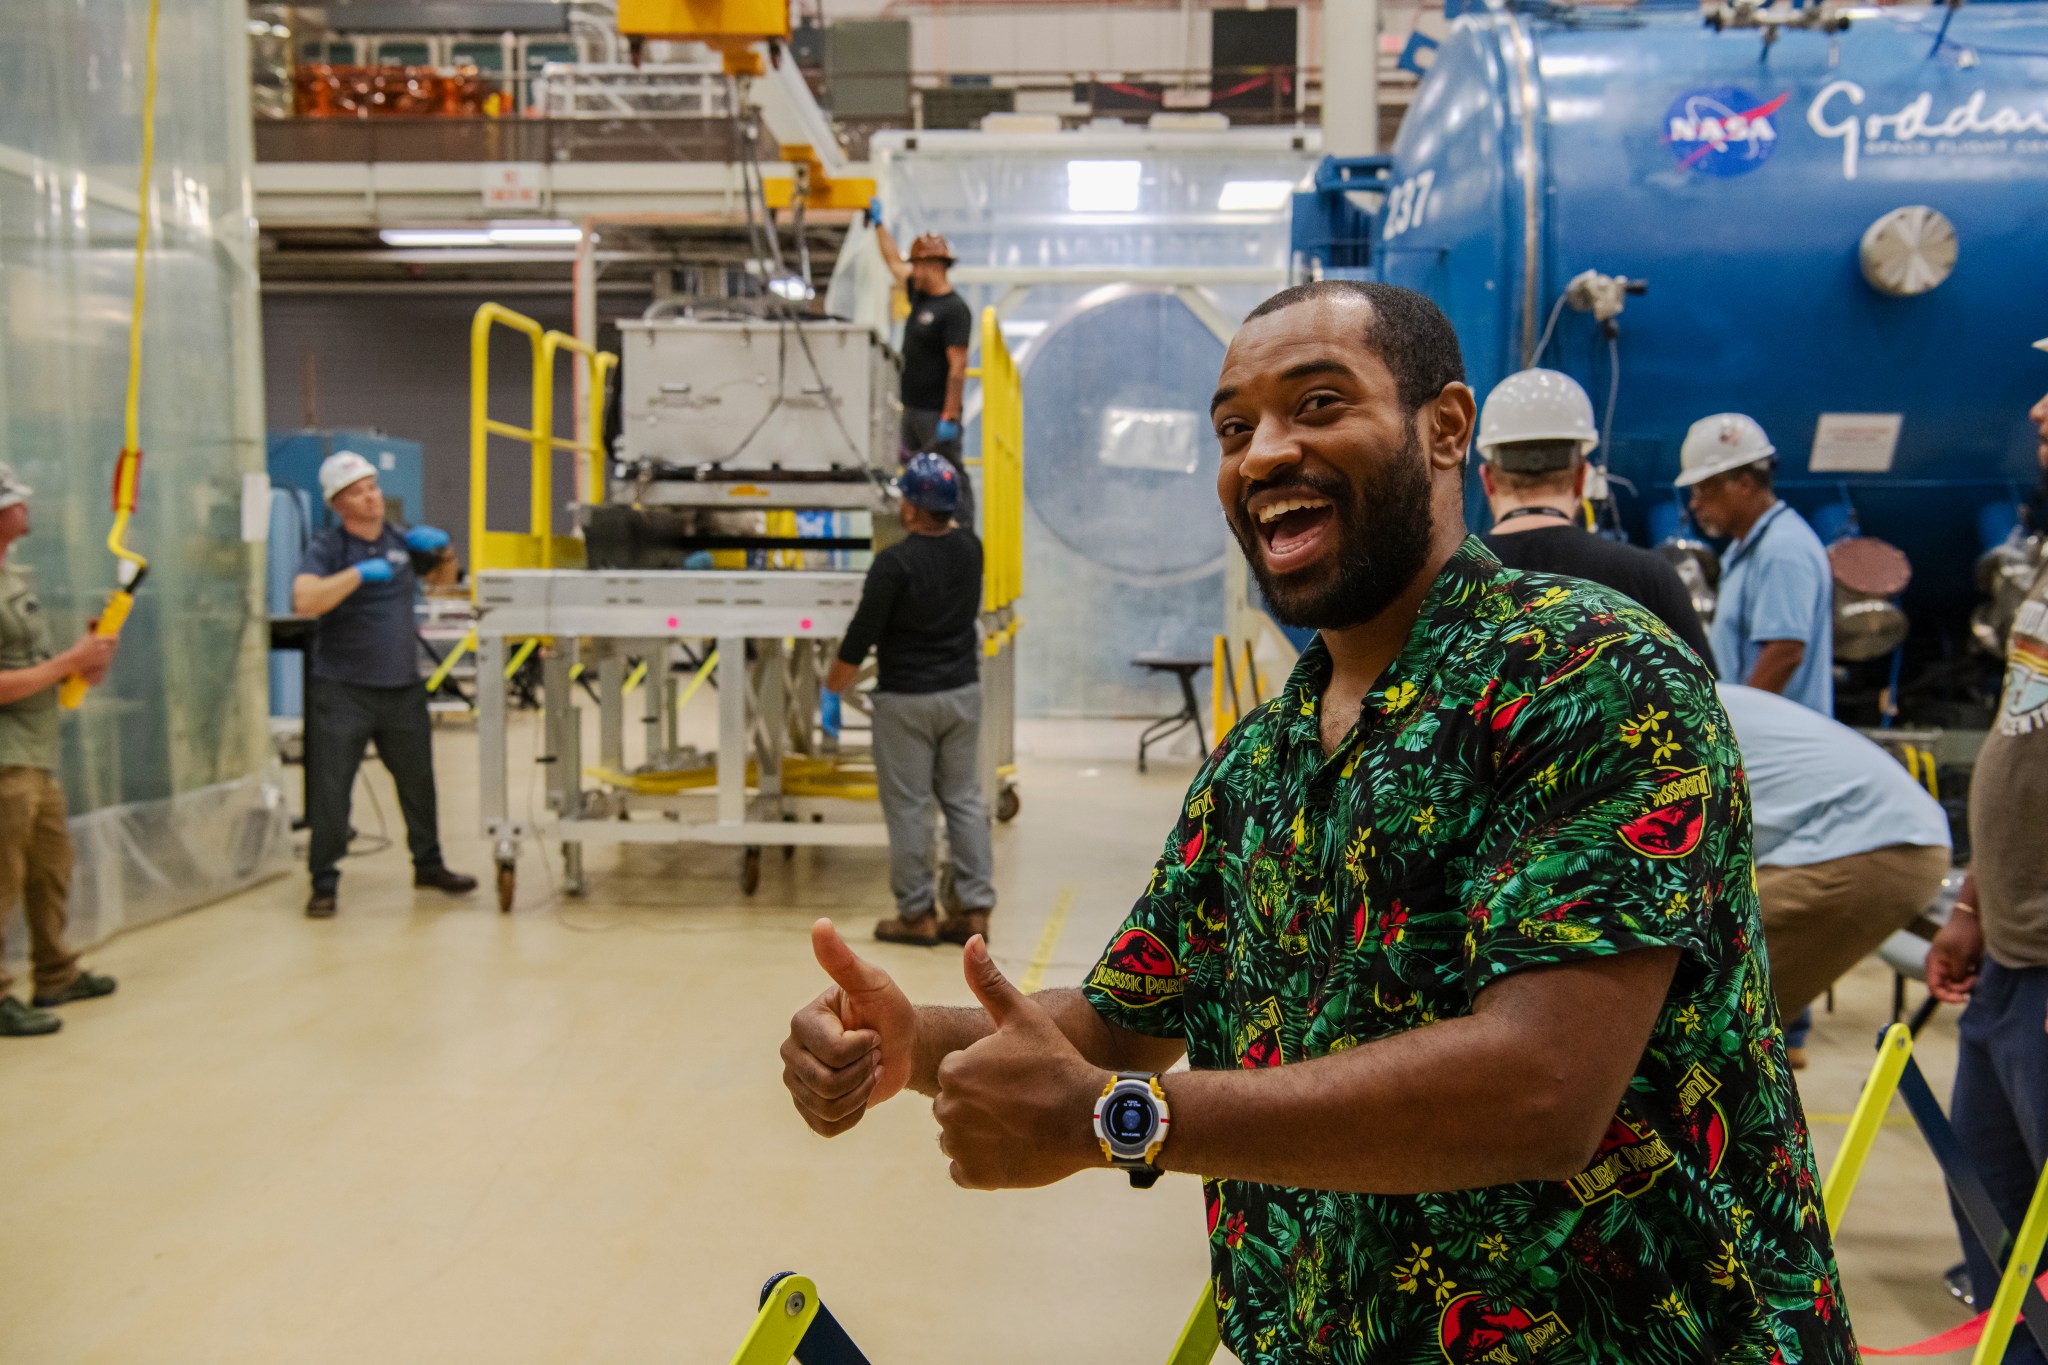 A man wearing a colorful jungle-print shirt grins and poses with two thumbs up in Goddard's clean room. Other employees in work clothes and hardhats work in the background.